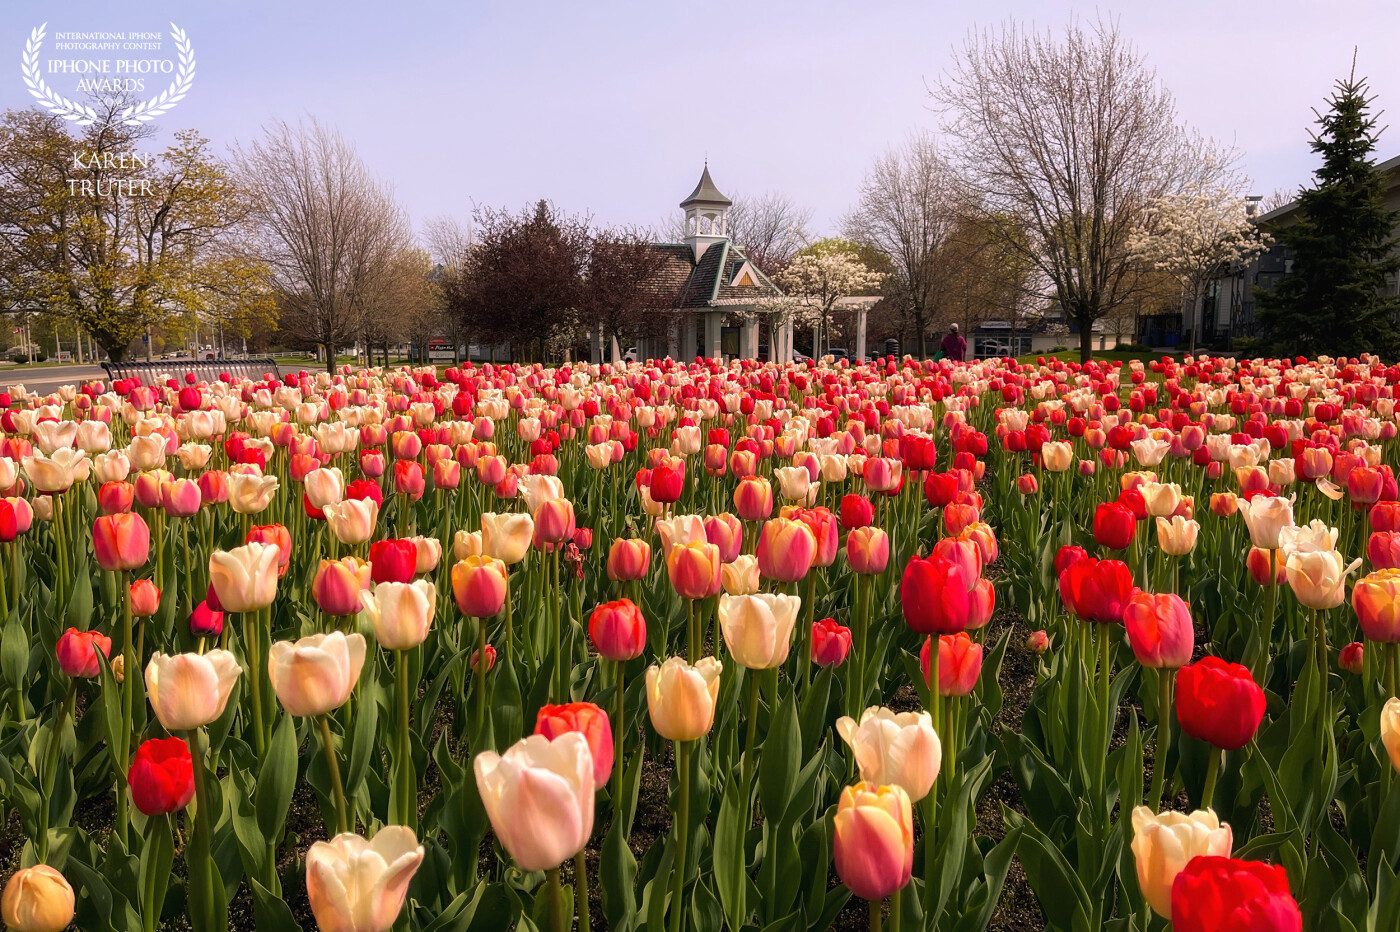 This spectacular bed of tulips provided a beautiful array of colour at one of the gateway intersections of my home town known locally as the “Feel Good Town”. This low angle photo provided leading lines to the gazebo in the background.